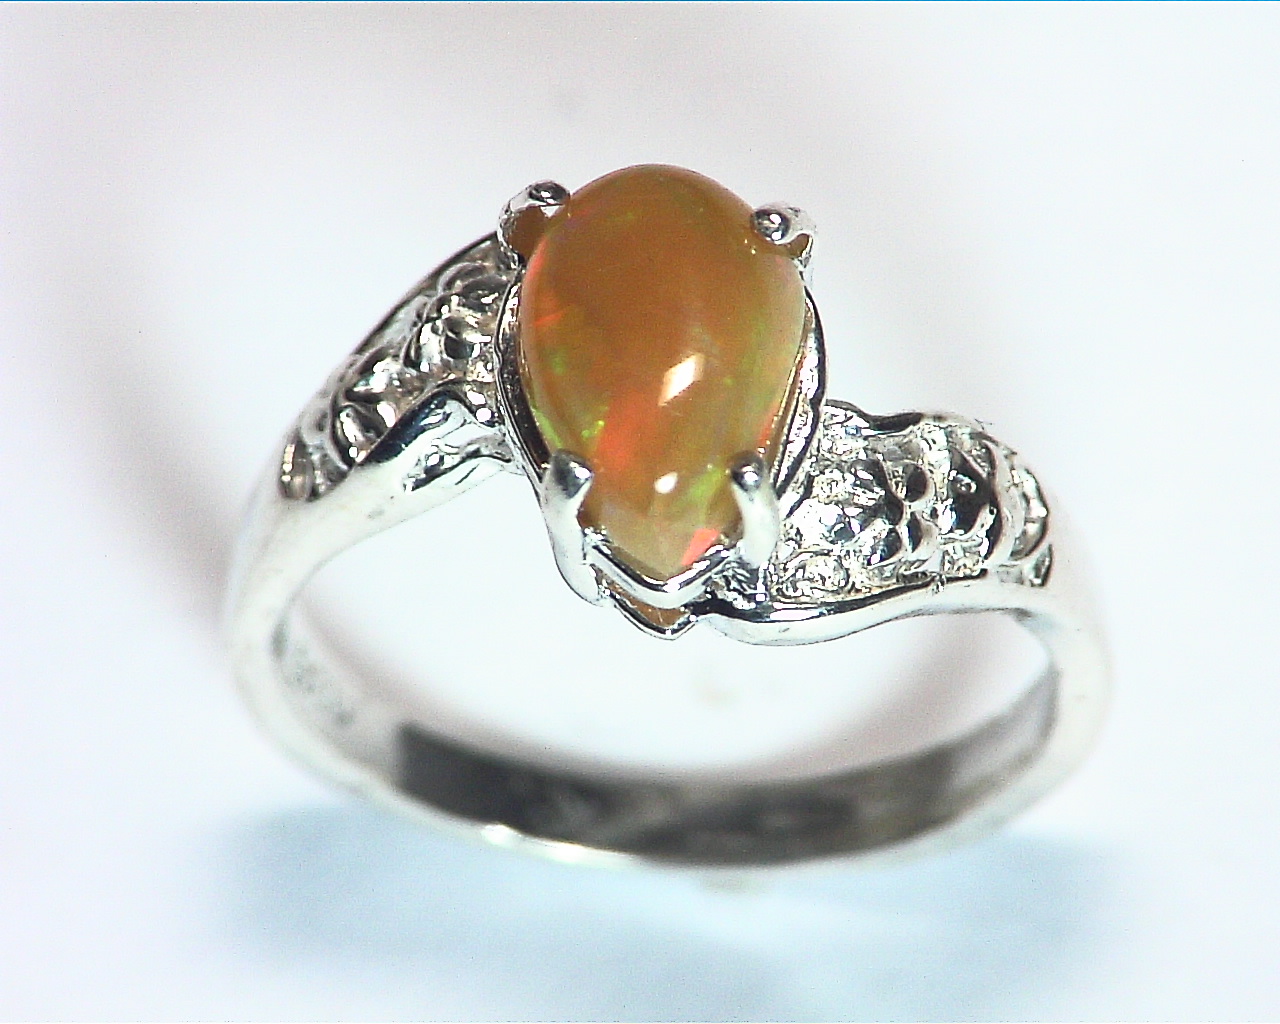 Opal (Mexican) Genuine Gemstone in Sterling silver Ring RSS,600 7